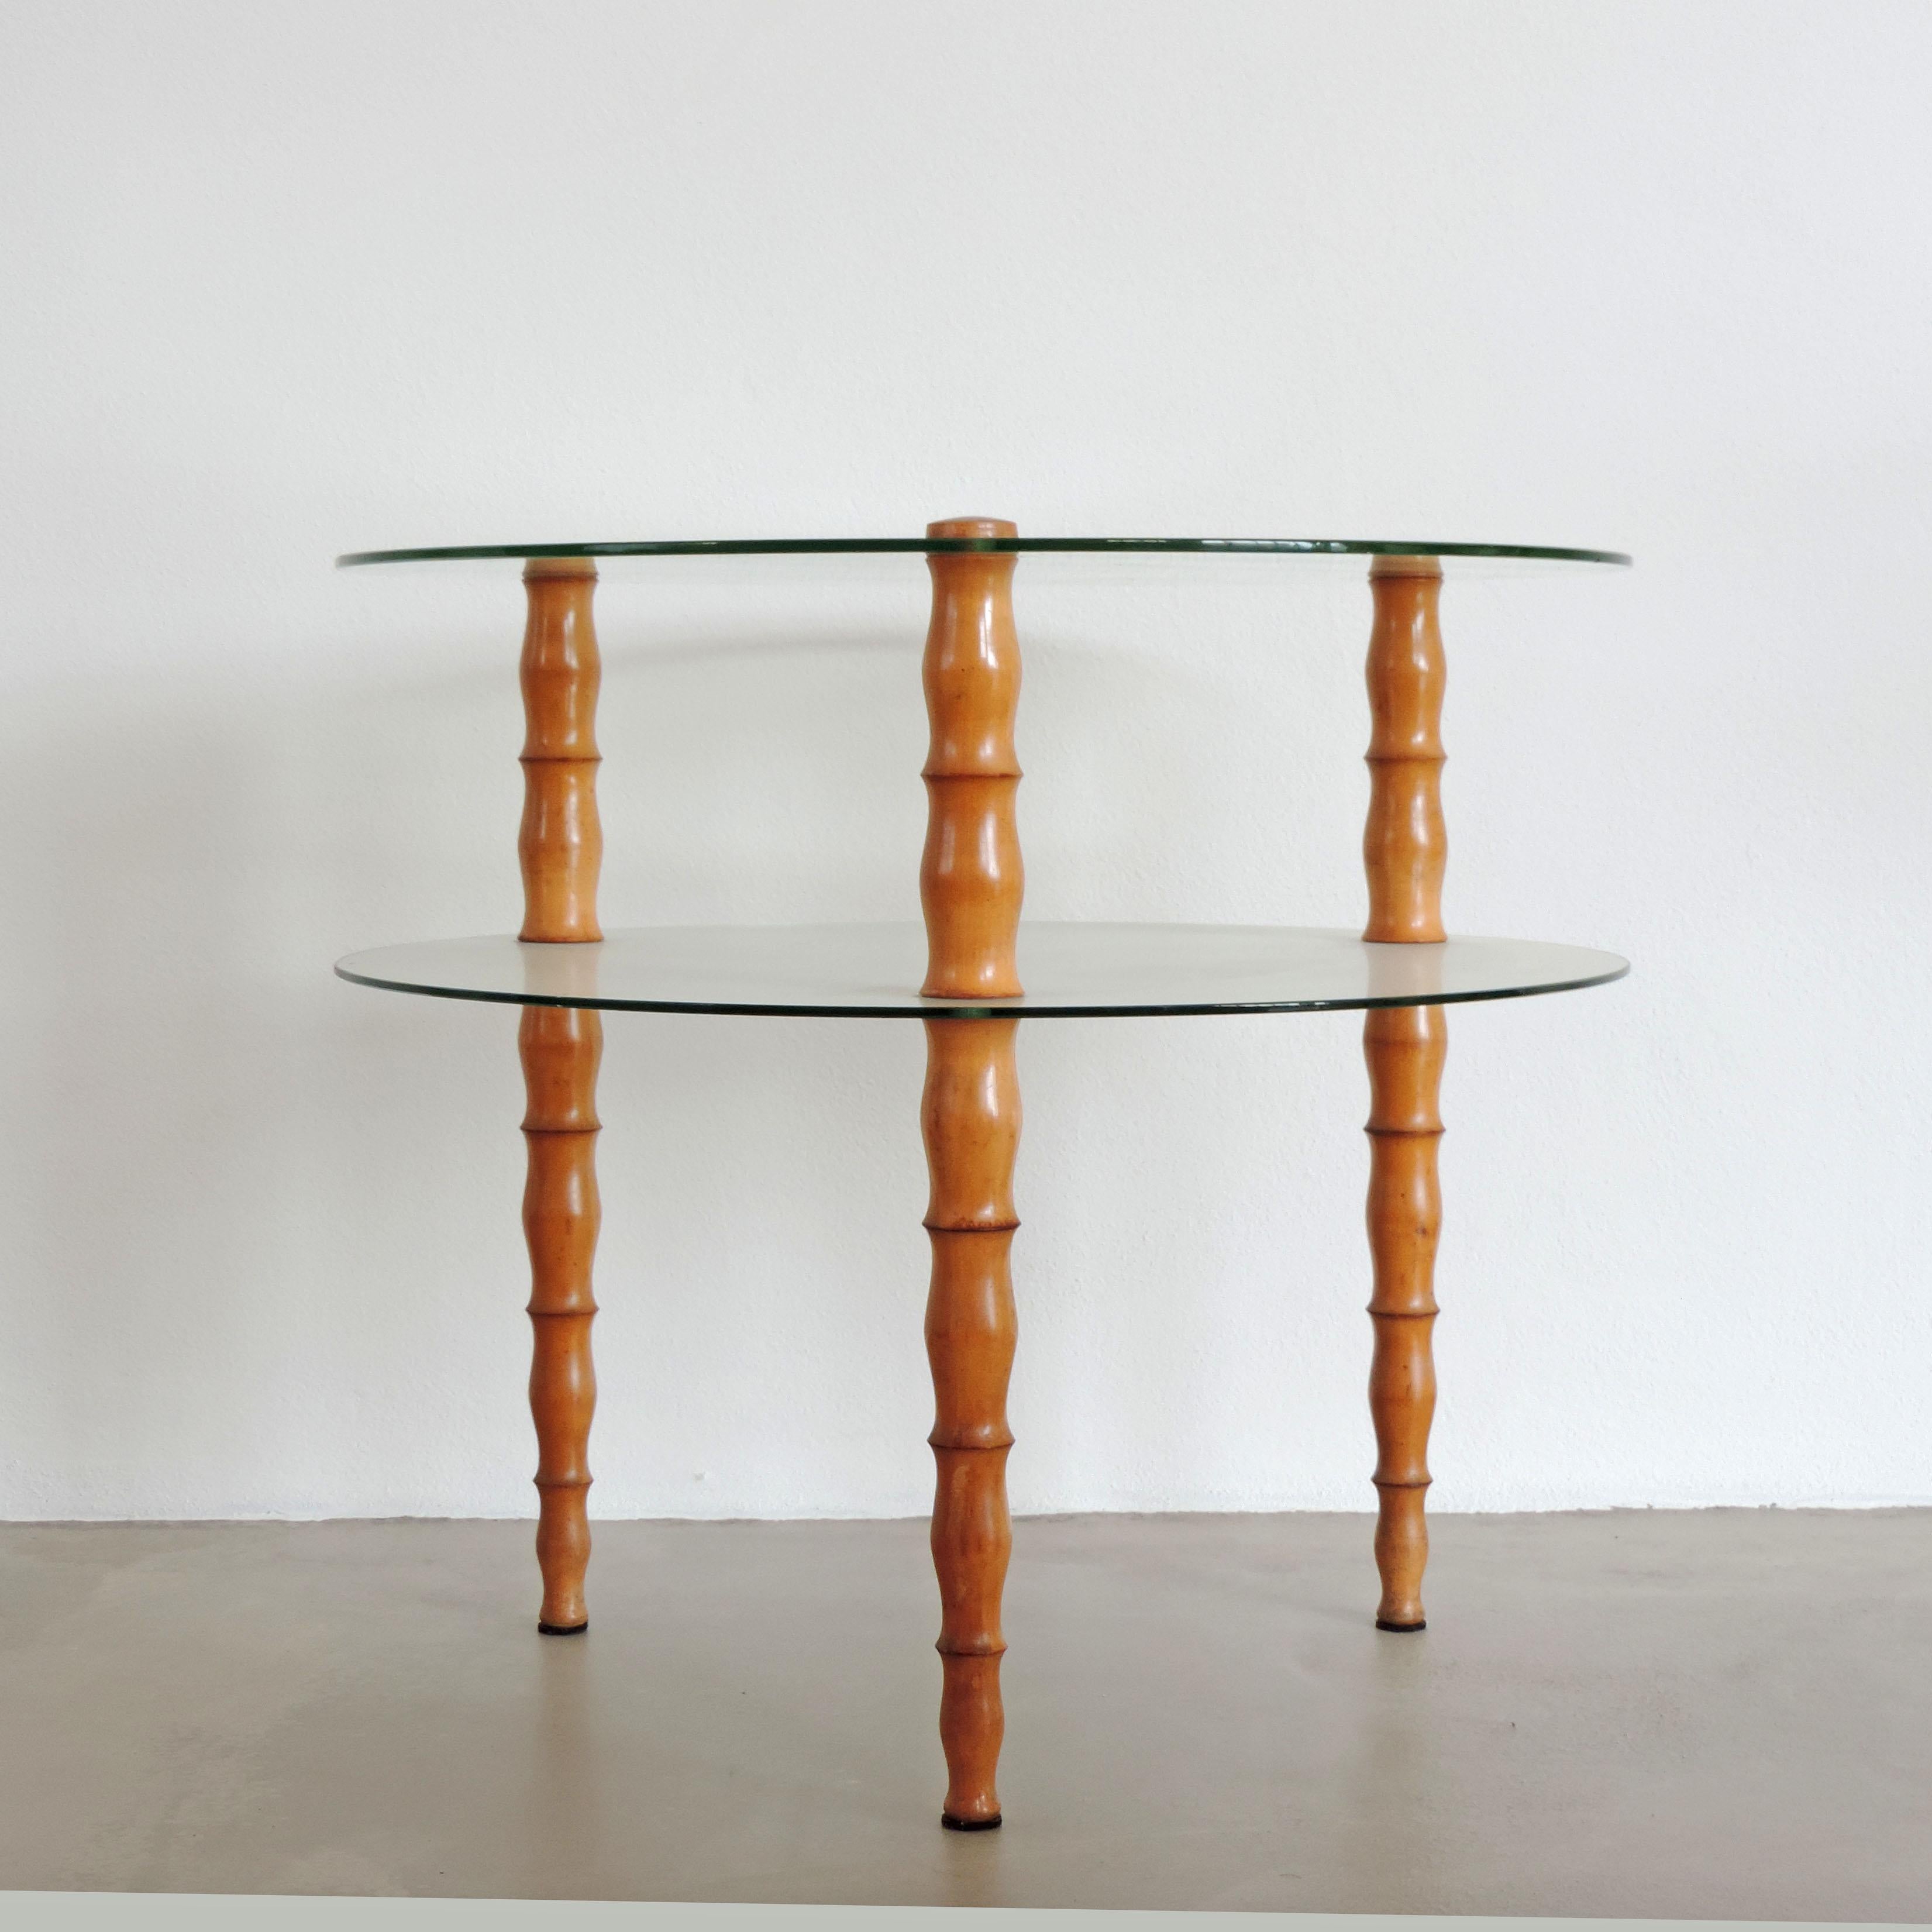 Italian 1940s circular two tier glass and turned wood coffee table.